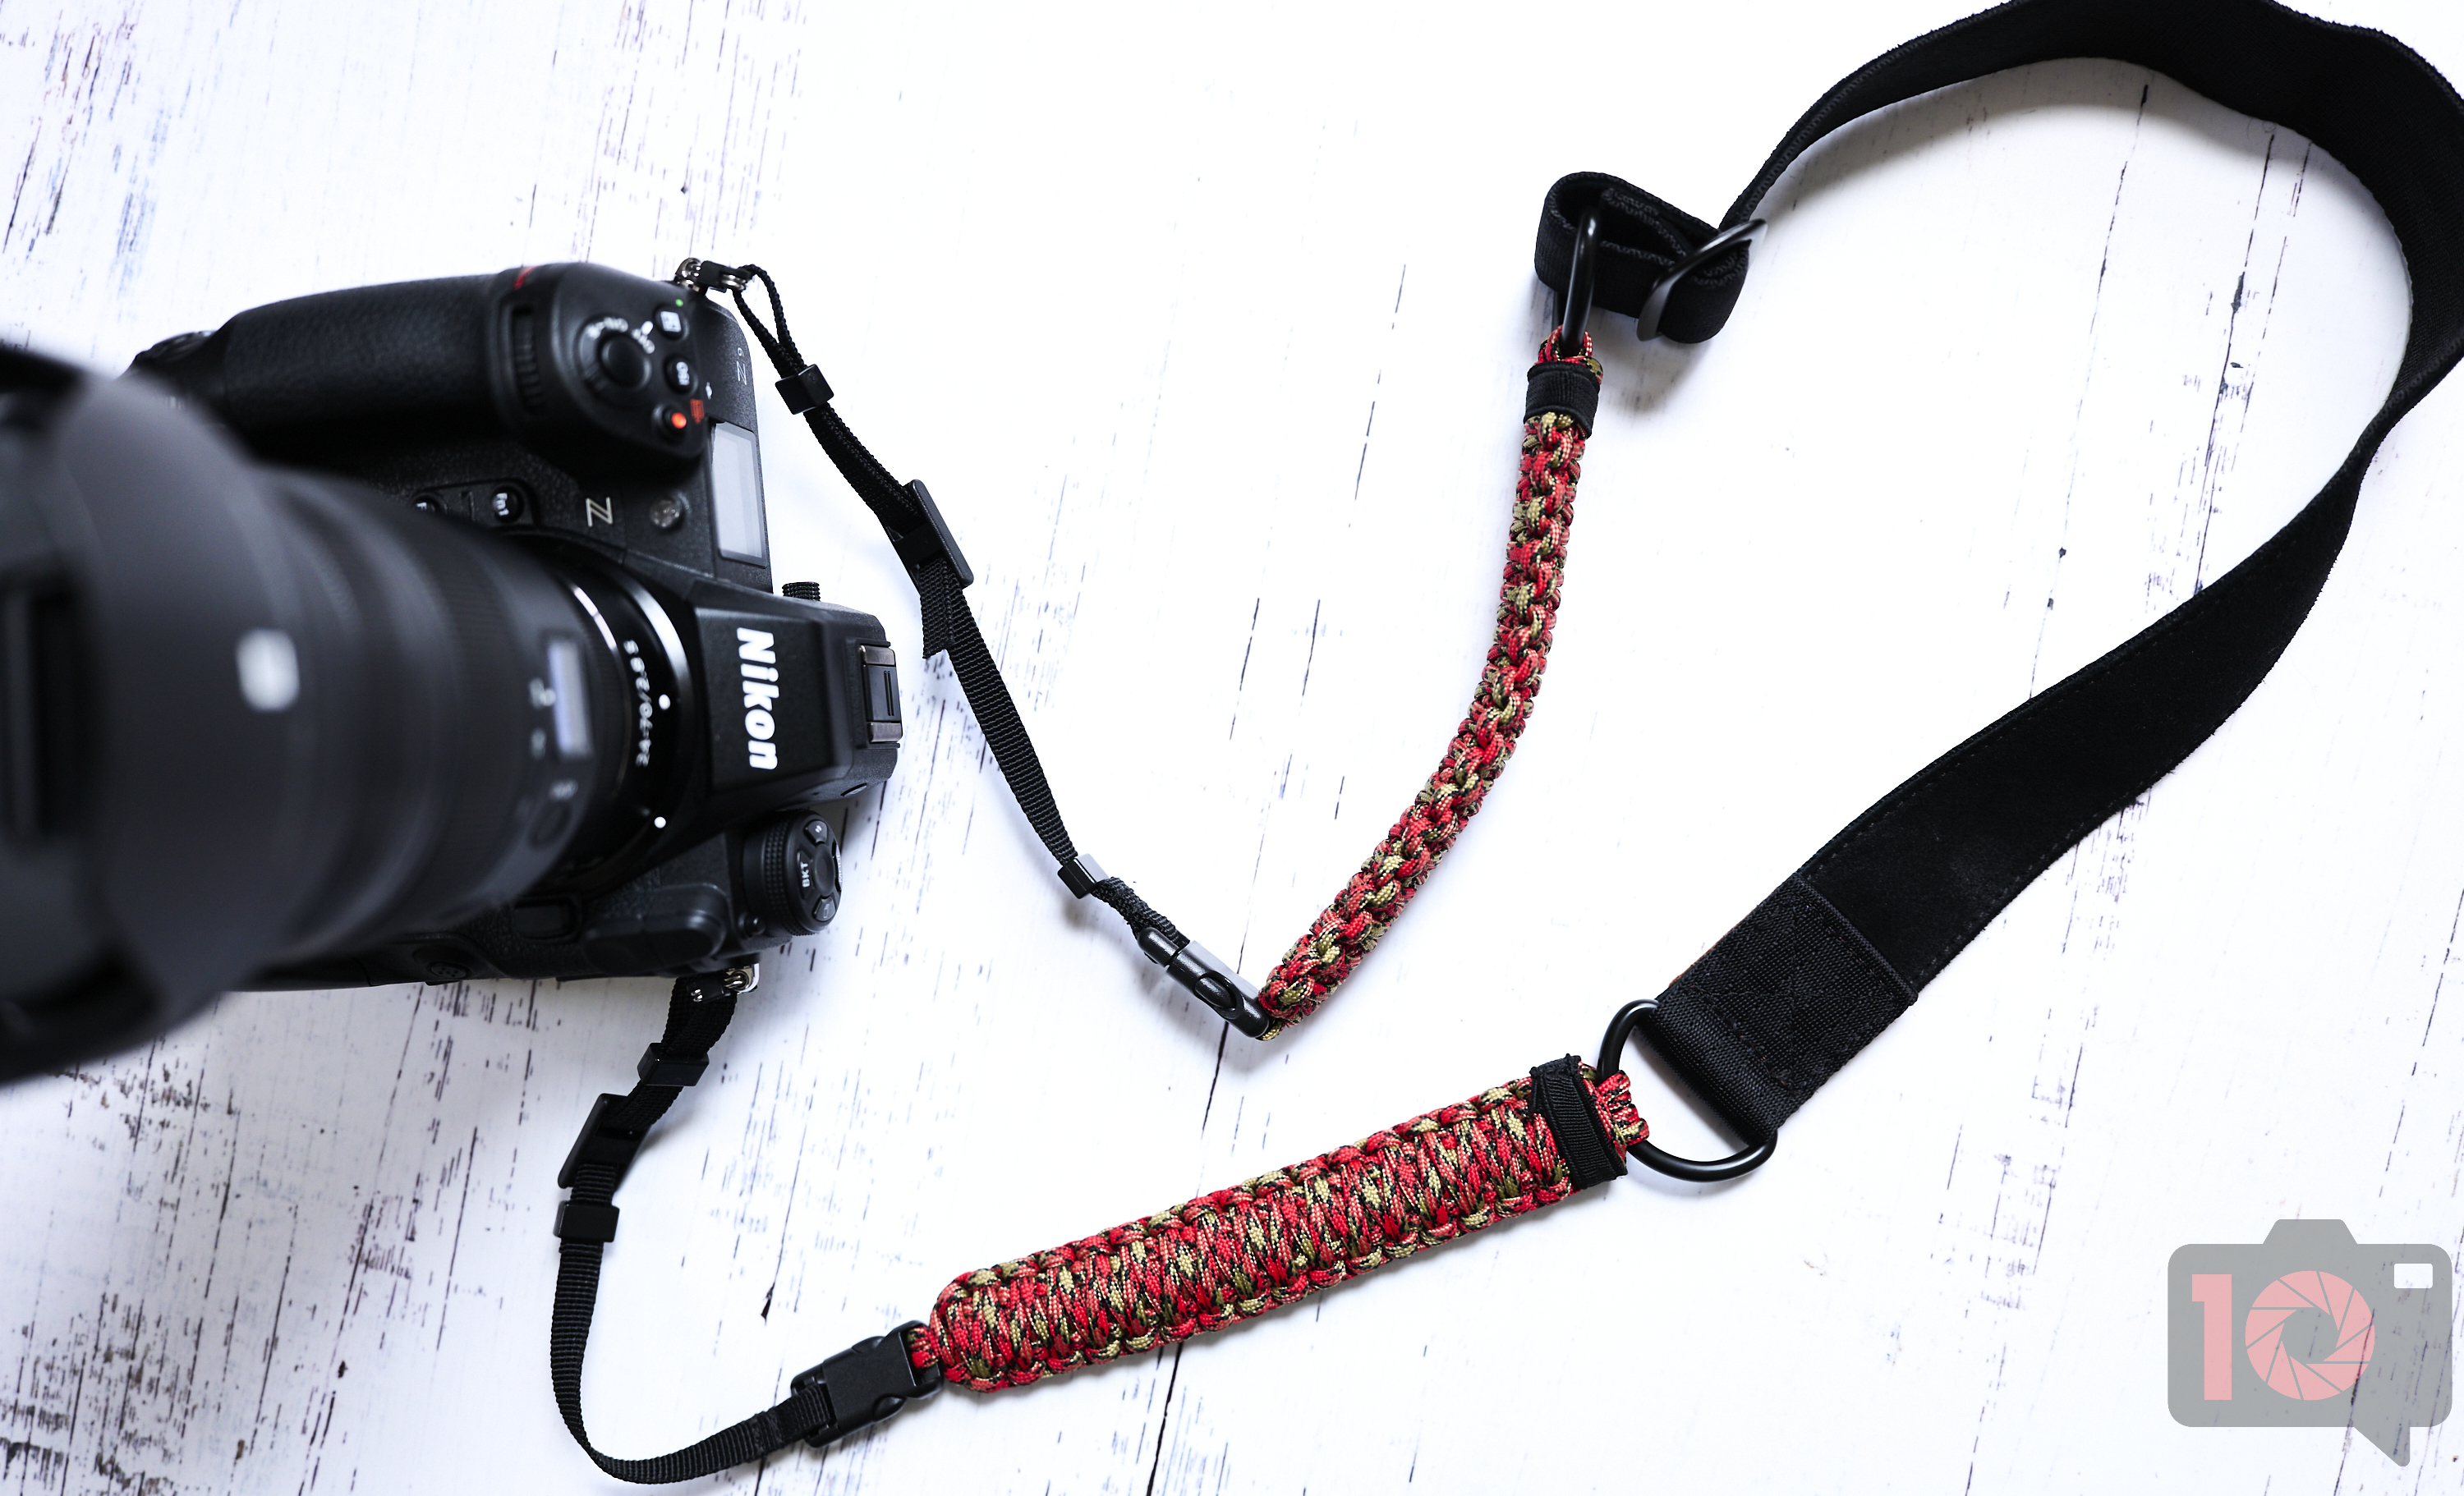 Pretty and Practical! Langly Paracord Strap Review